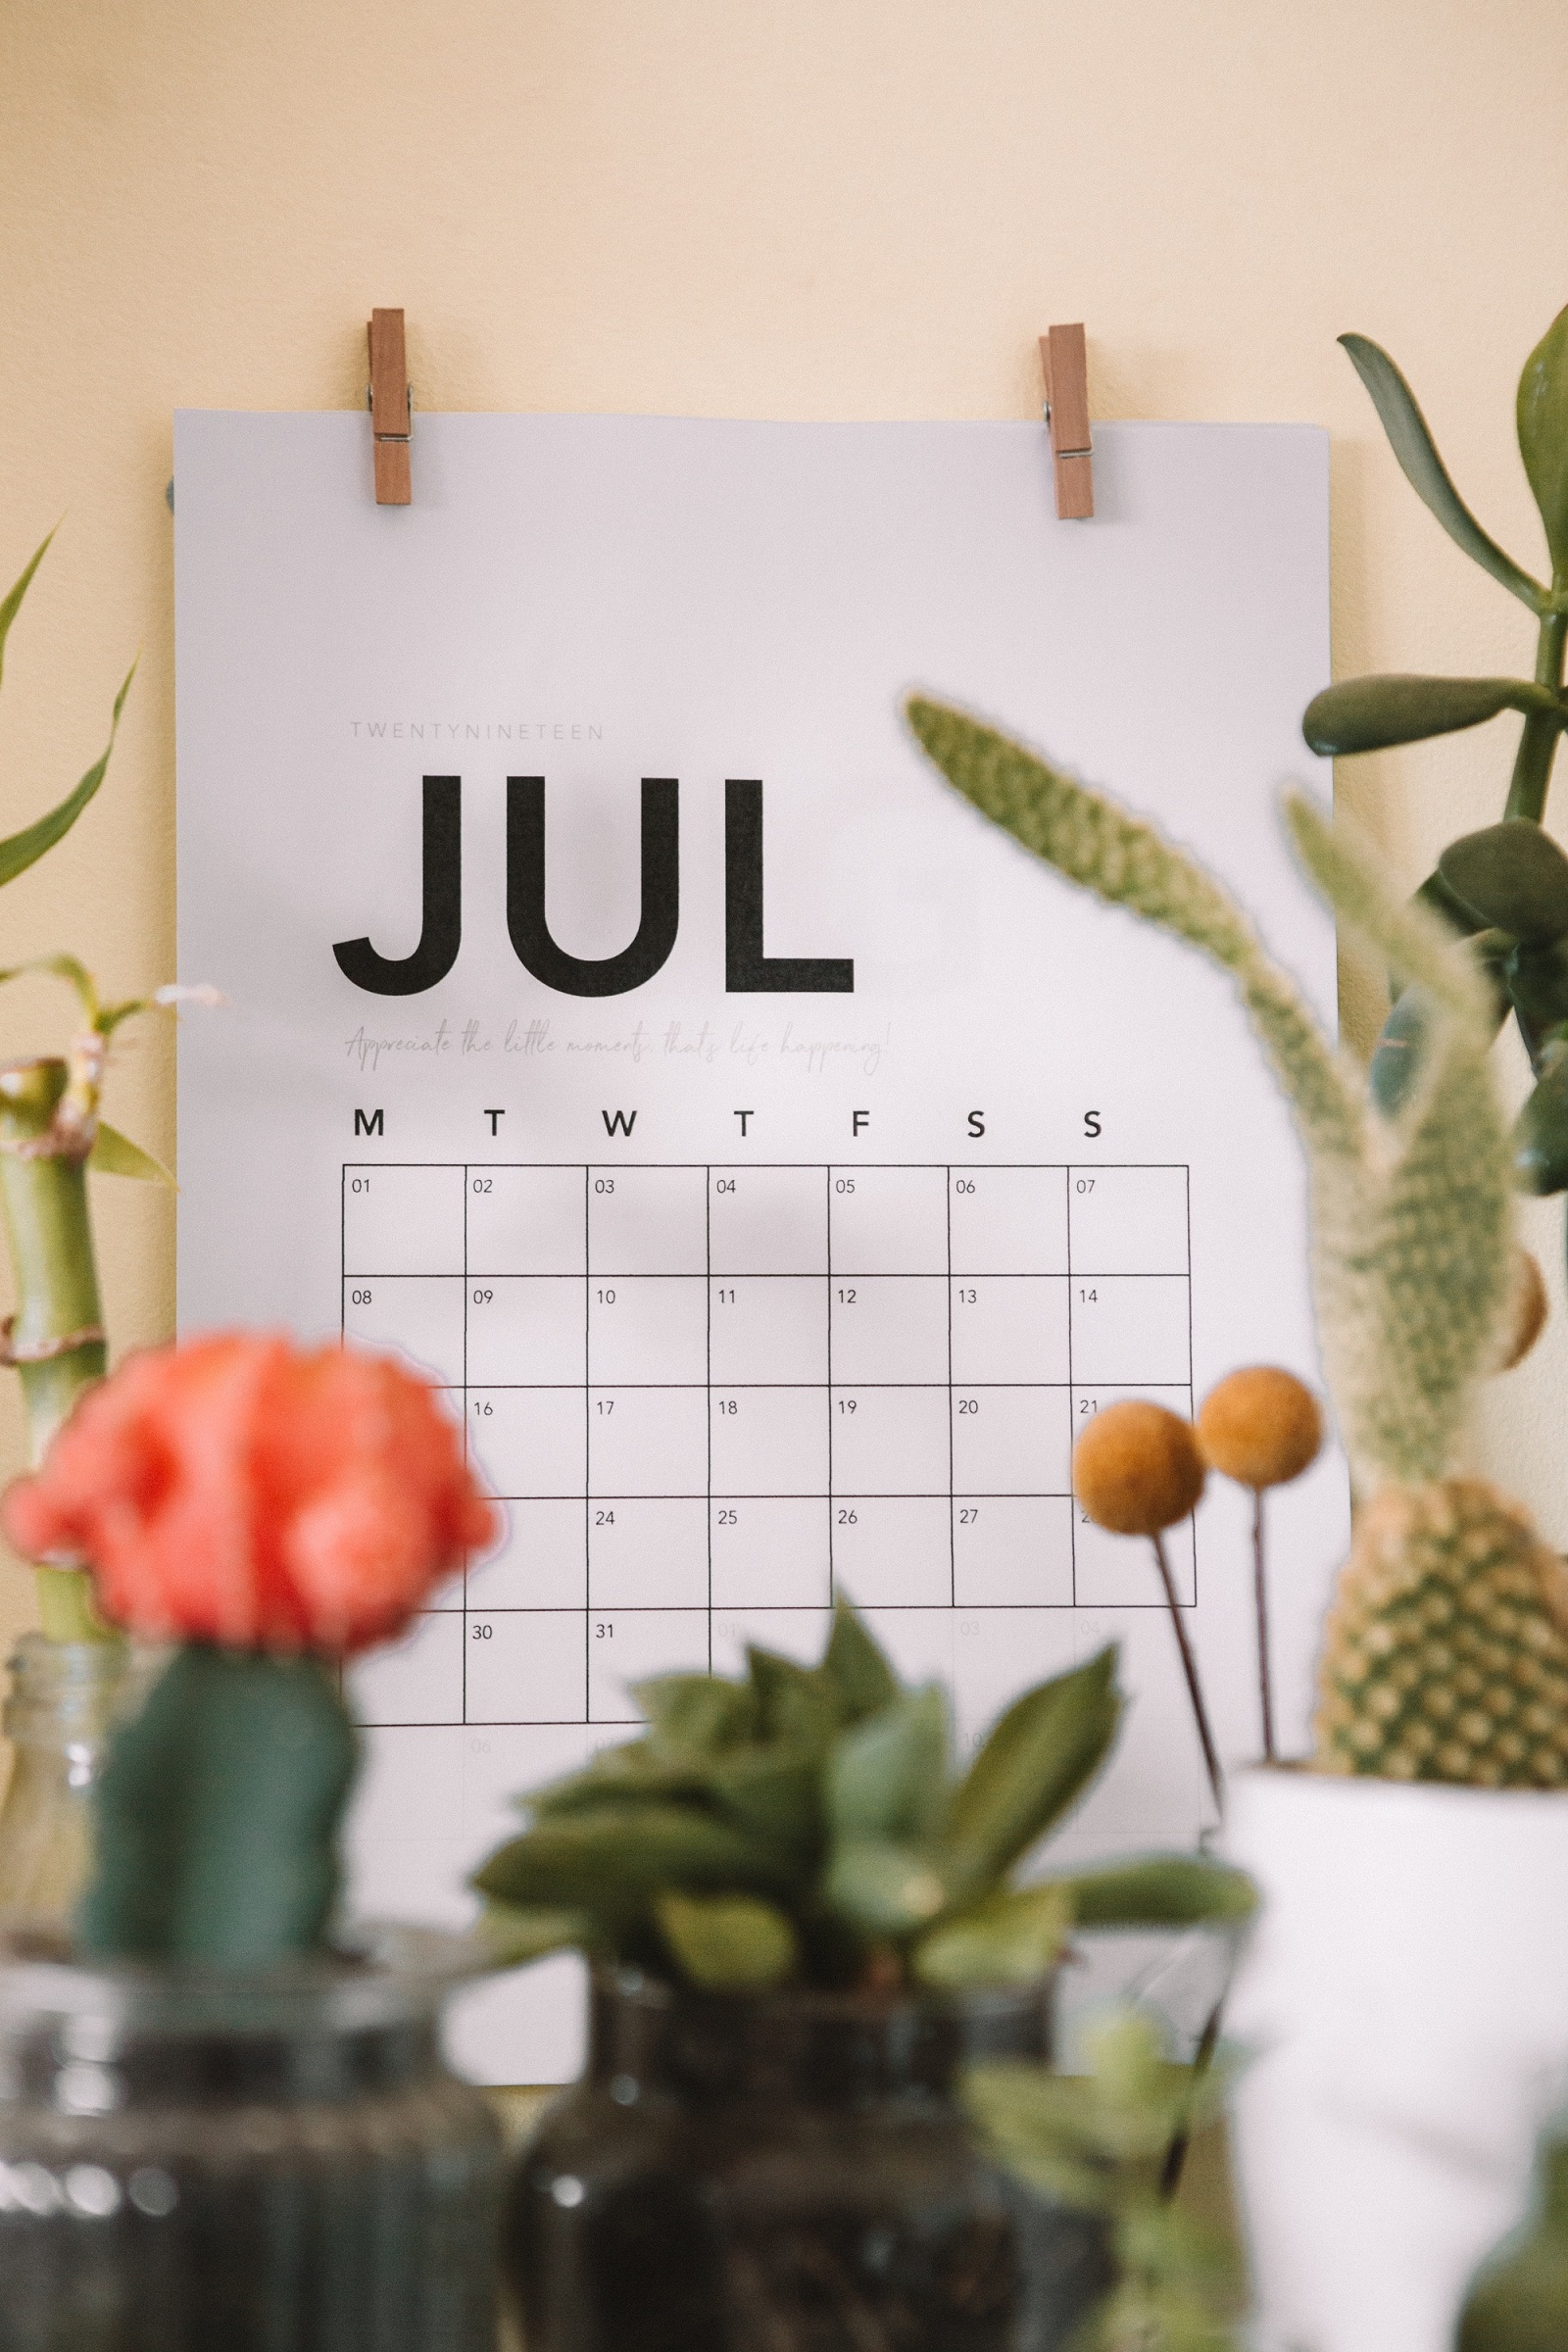 July calendar for Jean-Luc Andriot blog 070119